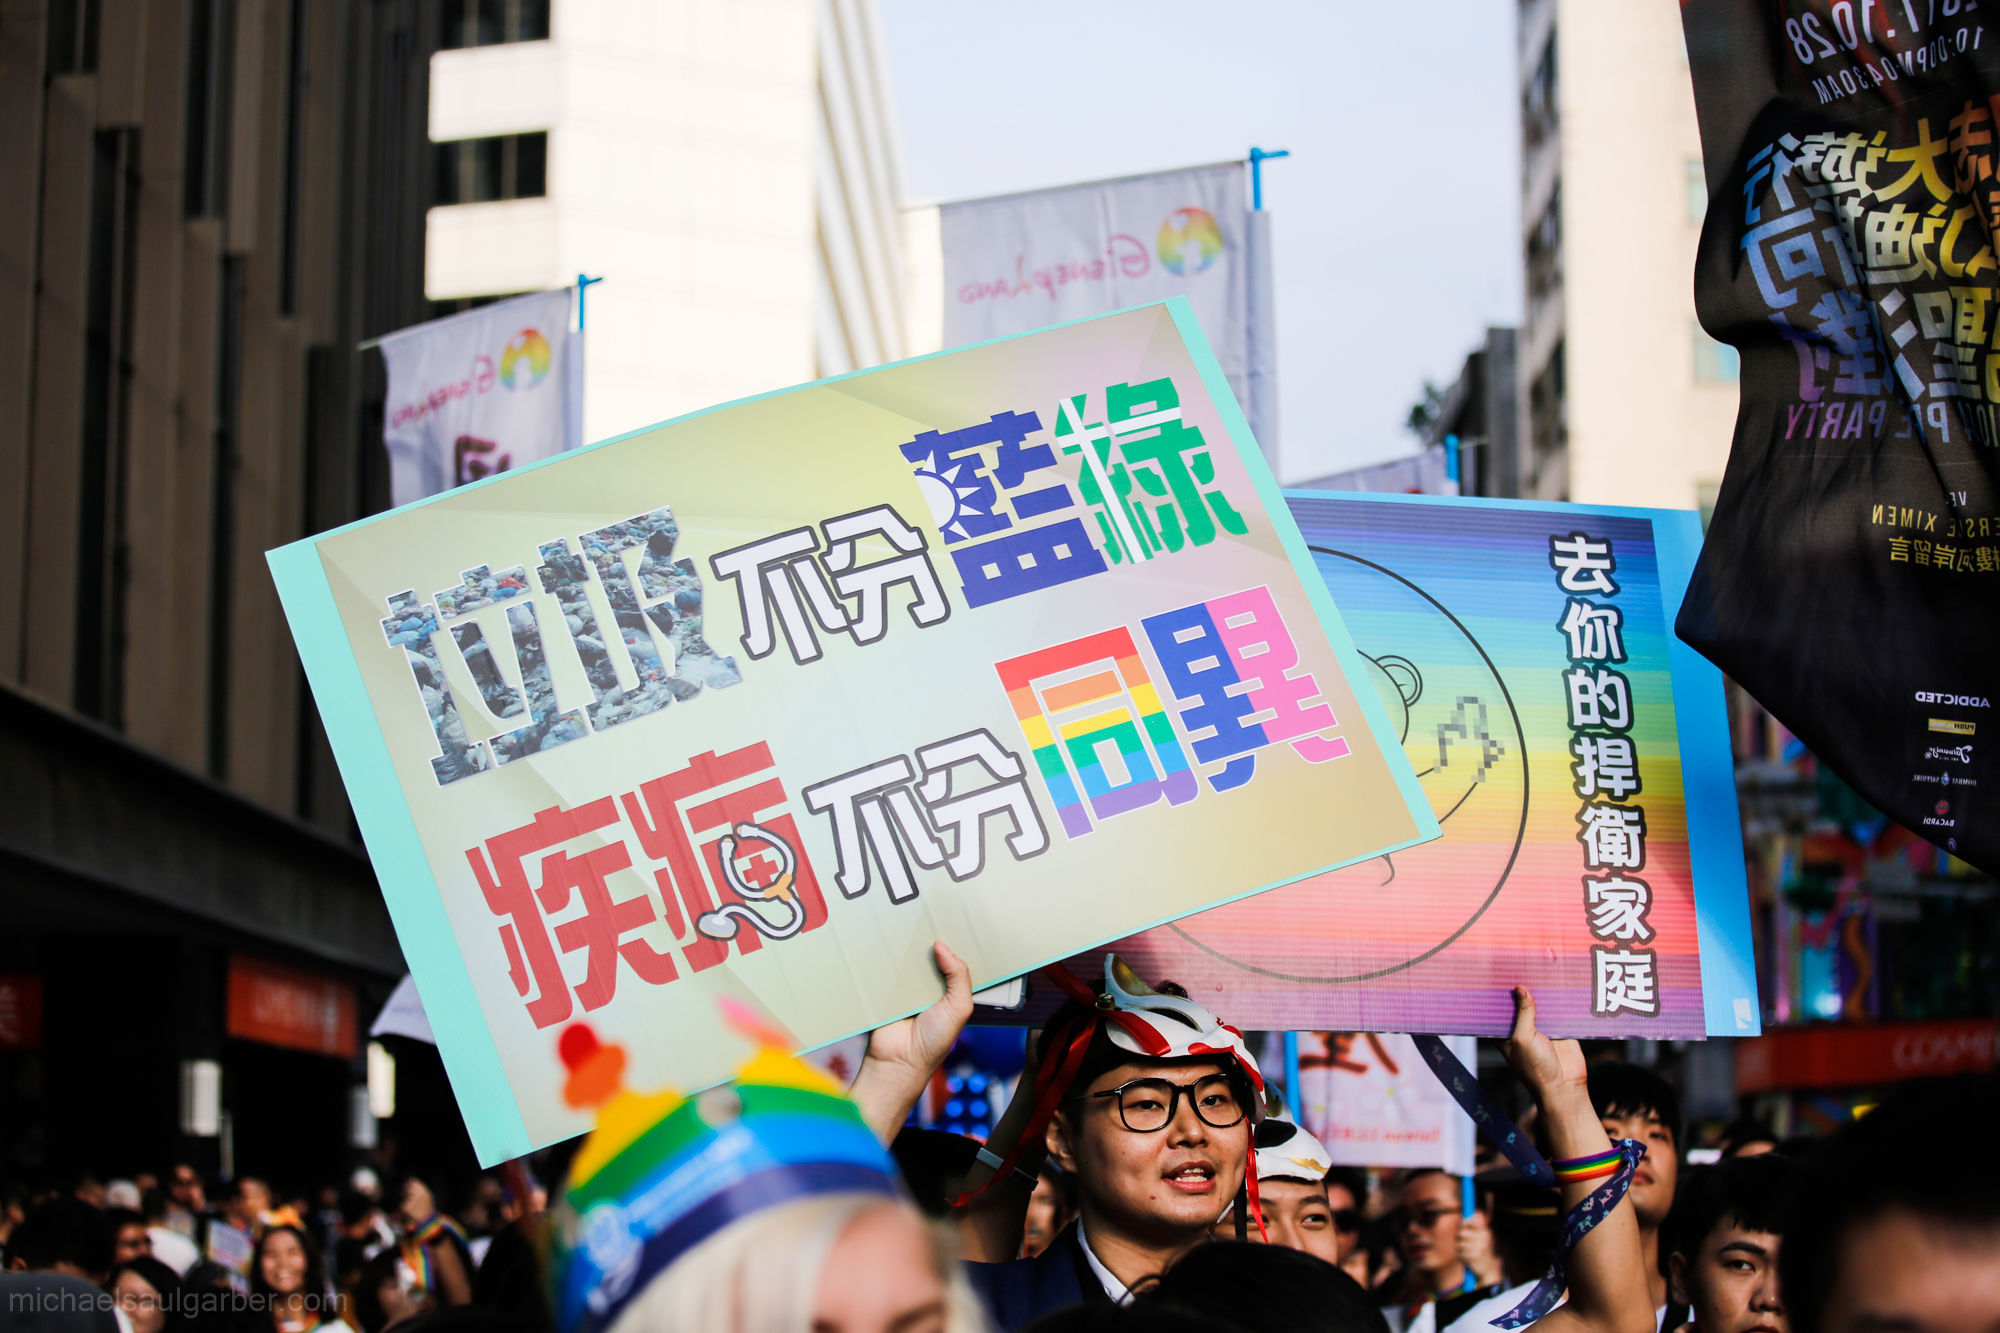 Sign reads, "Garbage can be blue or green (referring to Taiwan's two main political parties), disease can infect gay or straight", Taiwan Pride, 2017